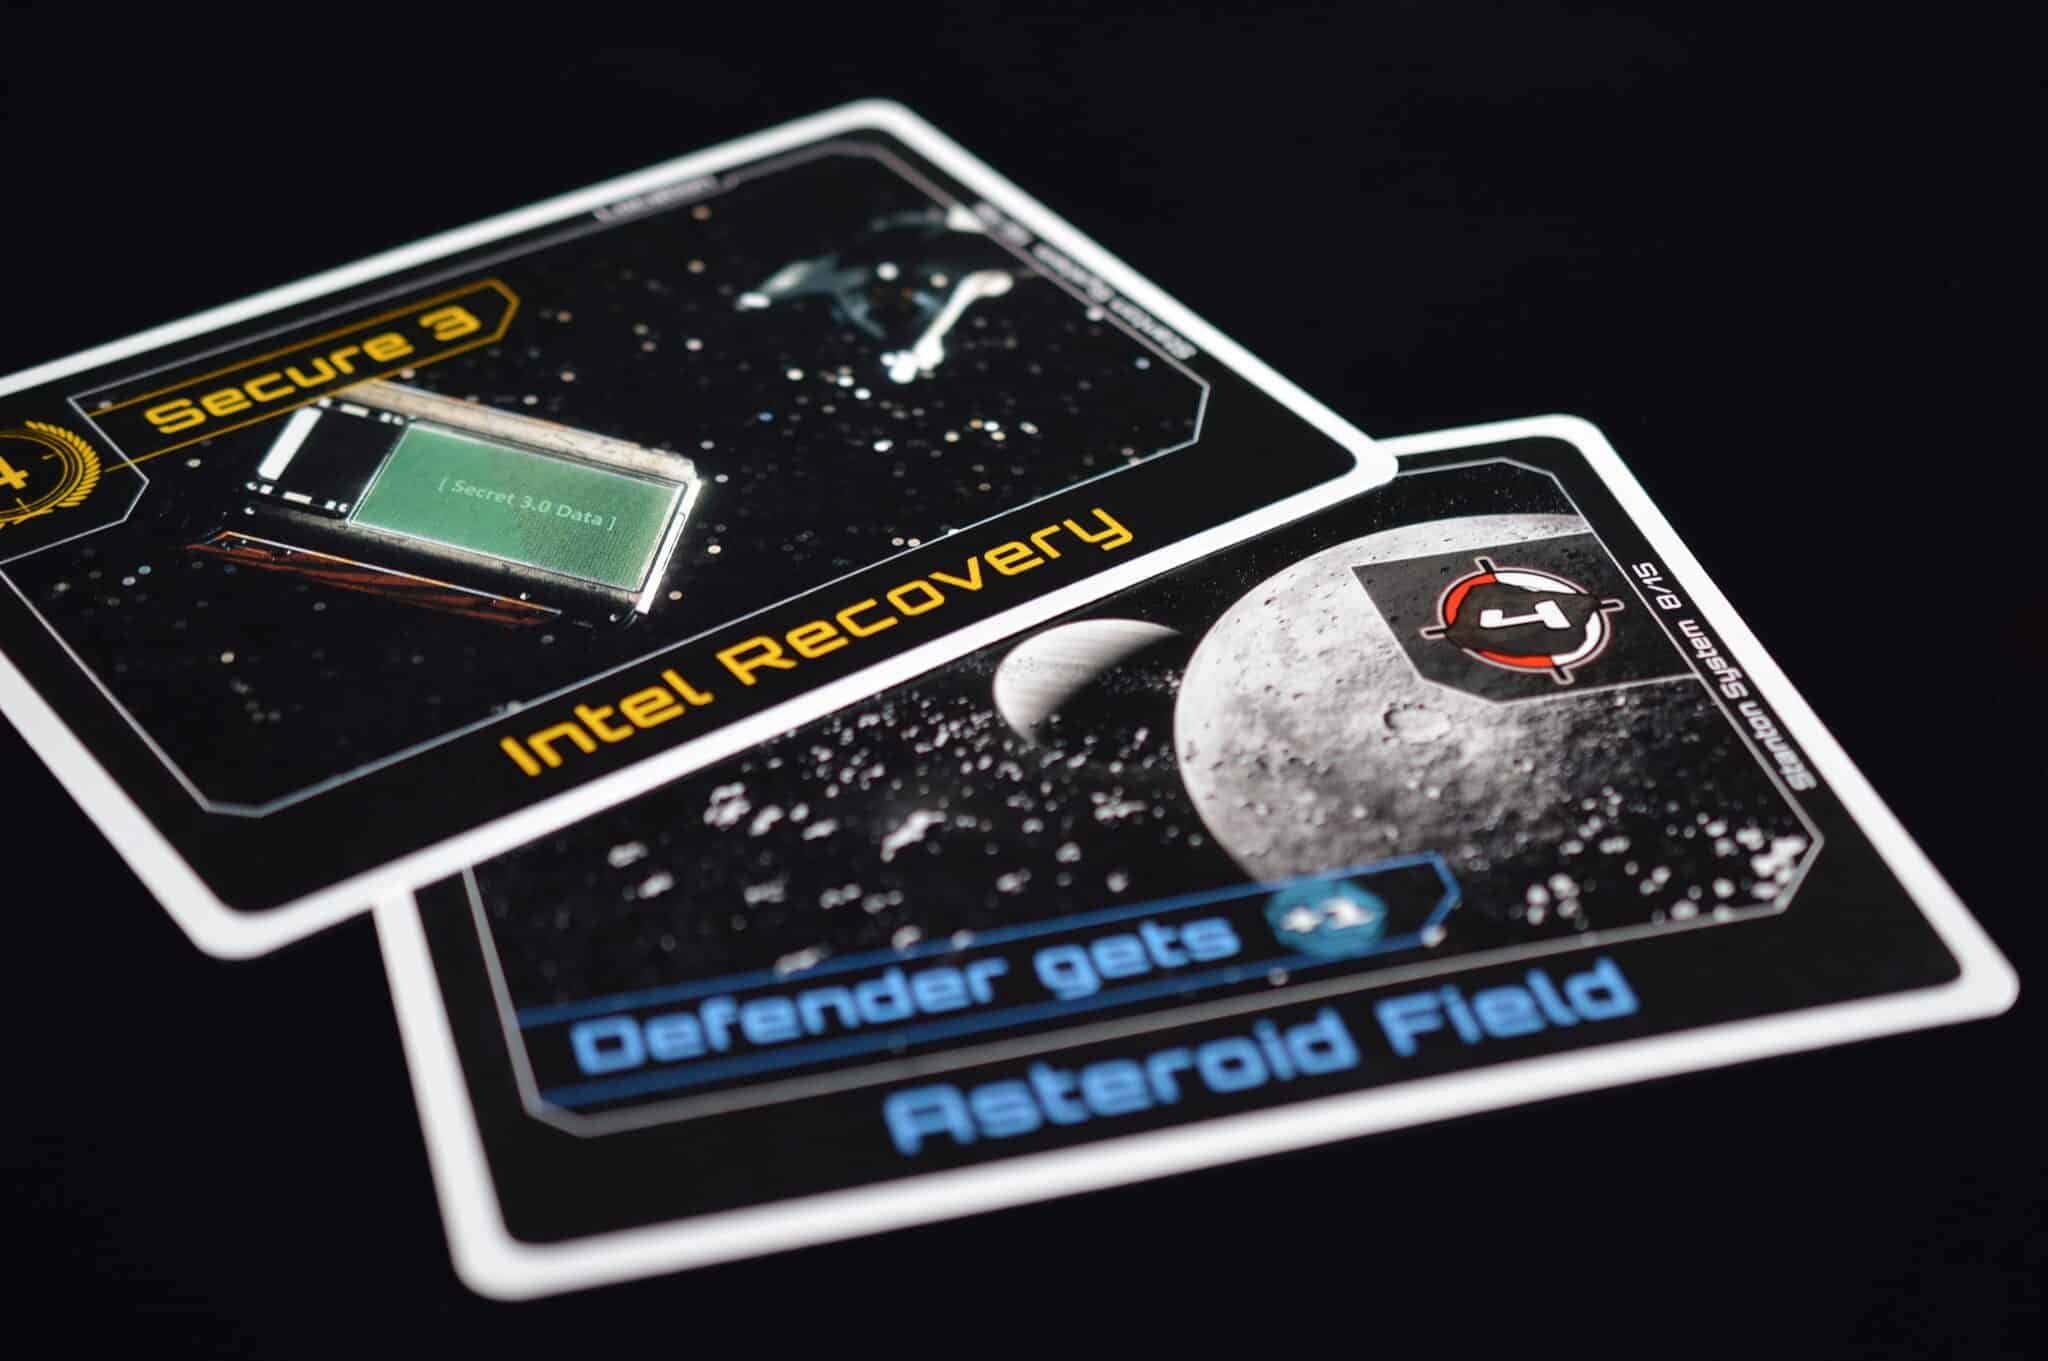 (The location cards are 12 x 17 centimetres in size and give different bonuses in addition to victory points.)